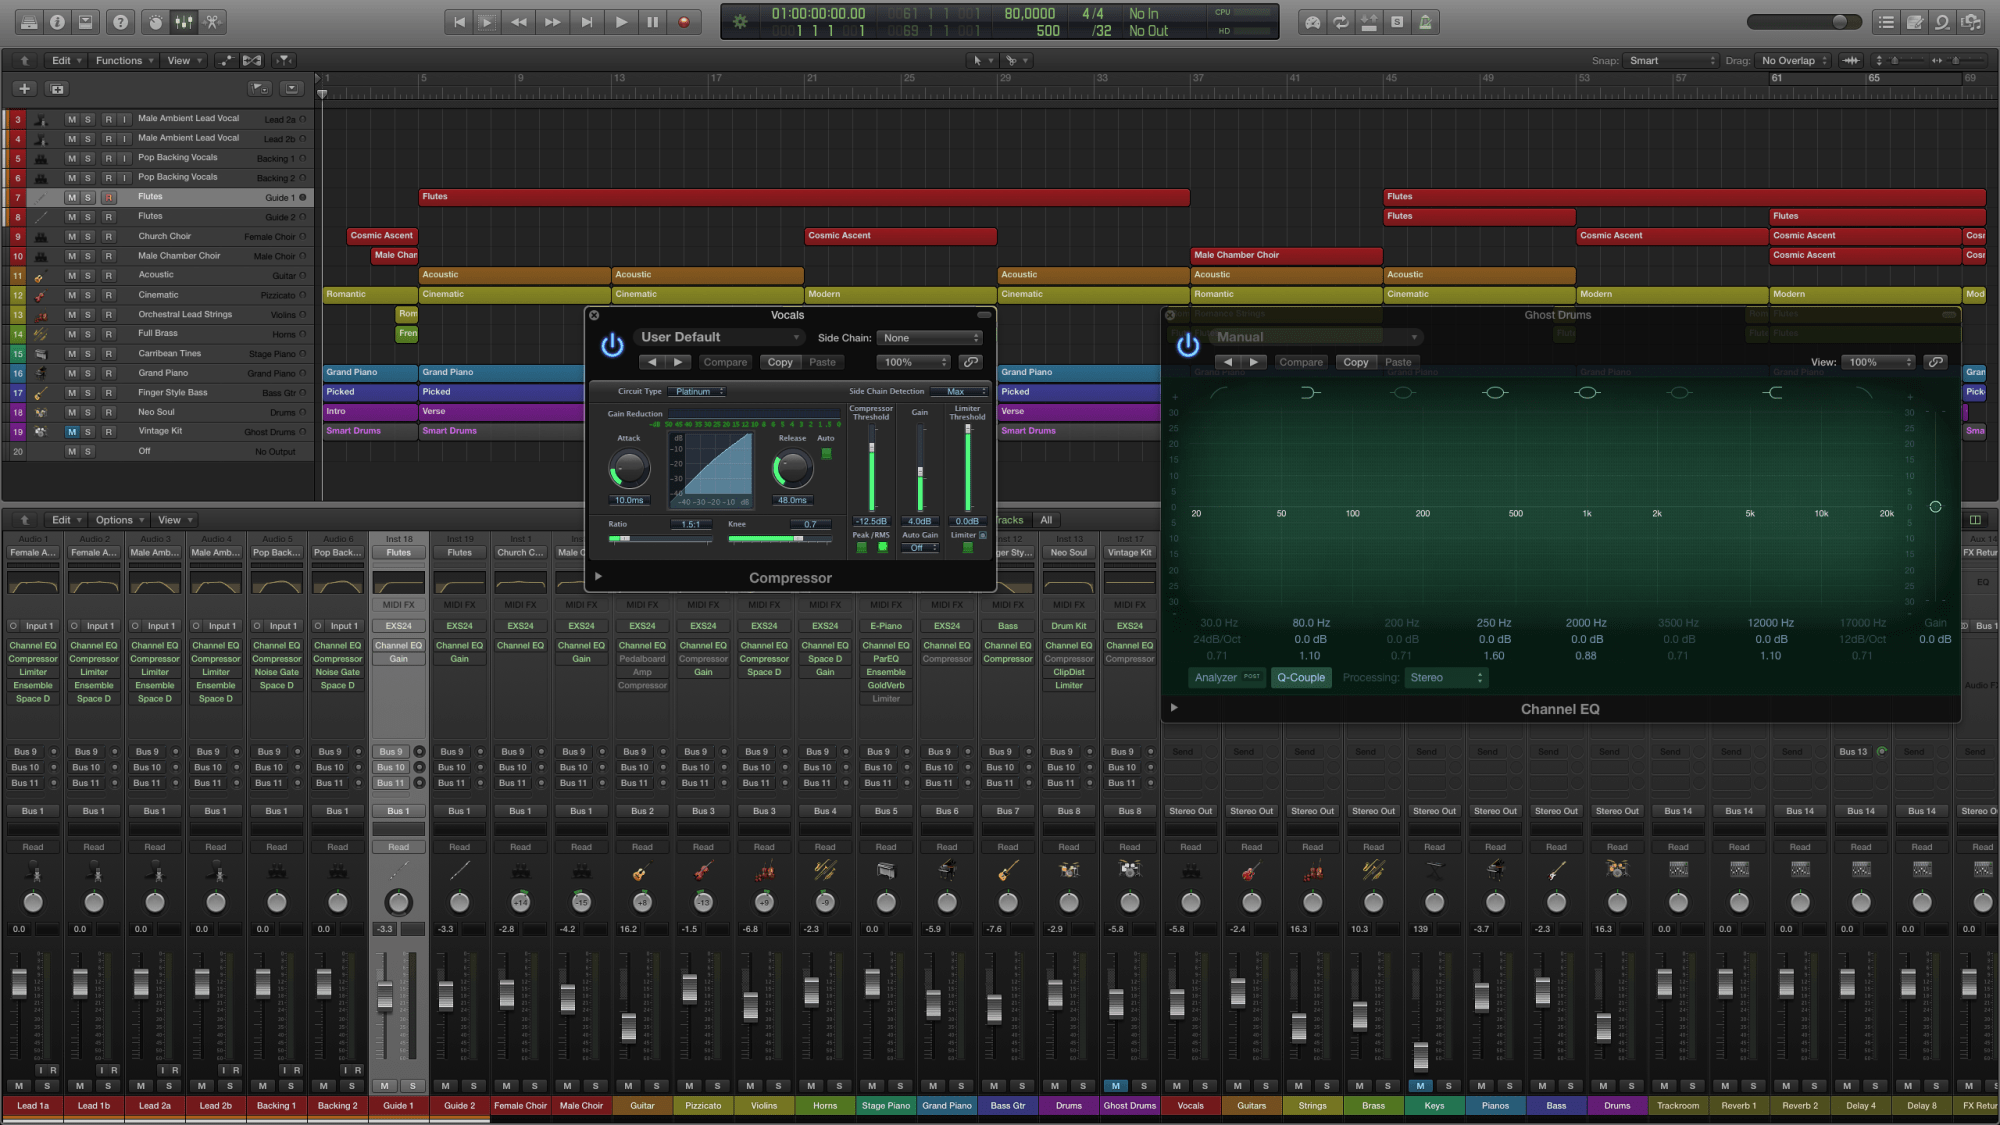 download the new for ios Logic Pro X